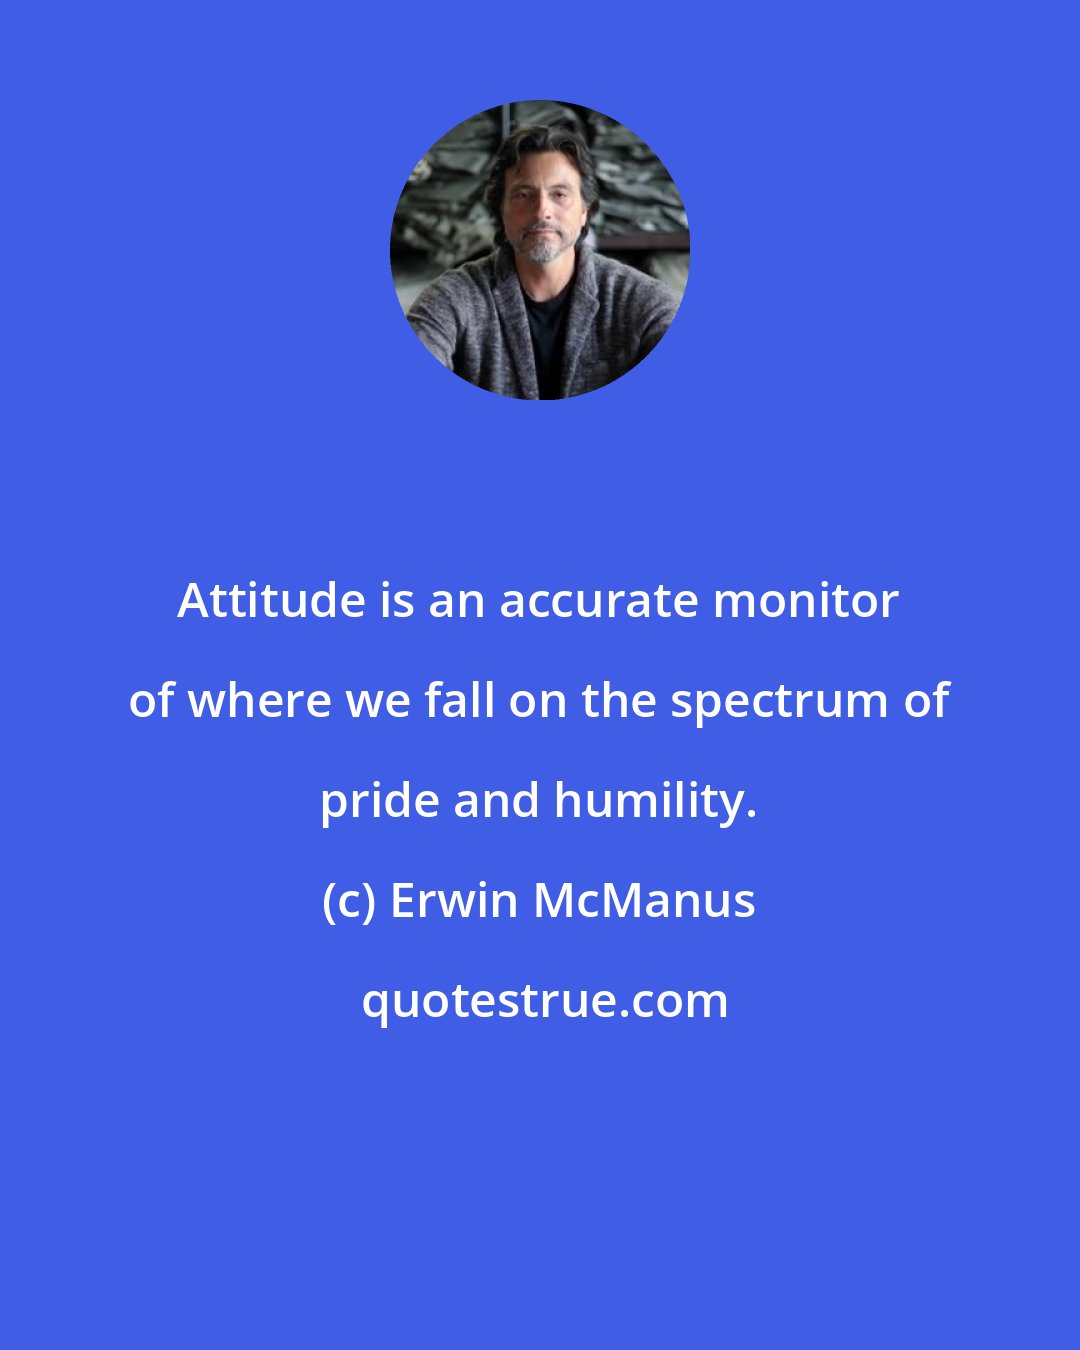 Erwin McManus: Attitude is an accurate monitor of where we fall on the spectrum of pride and humility.